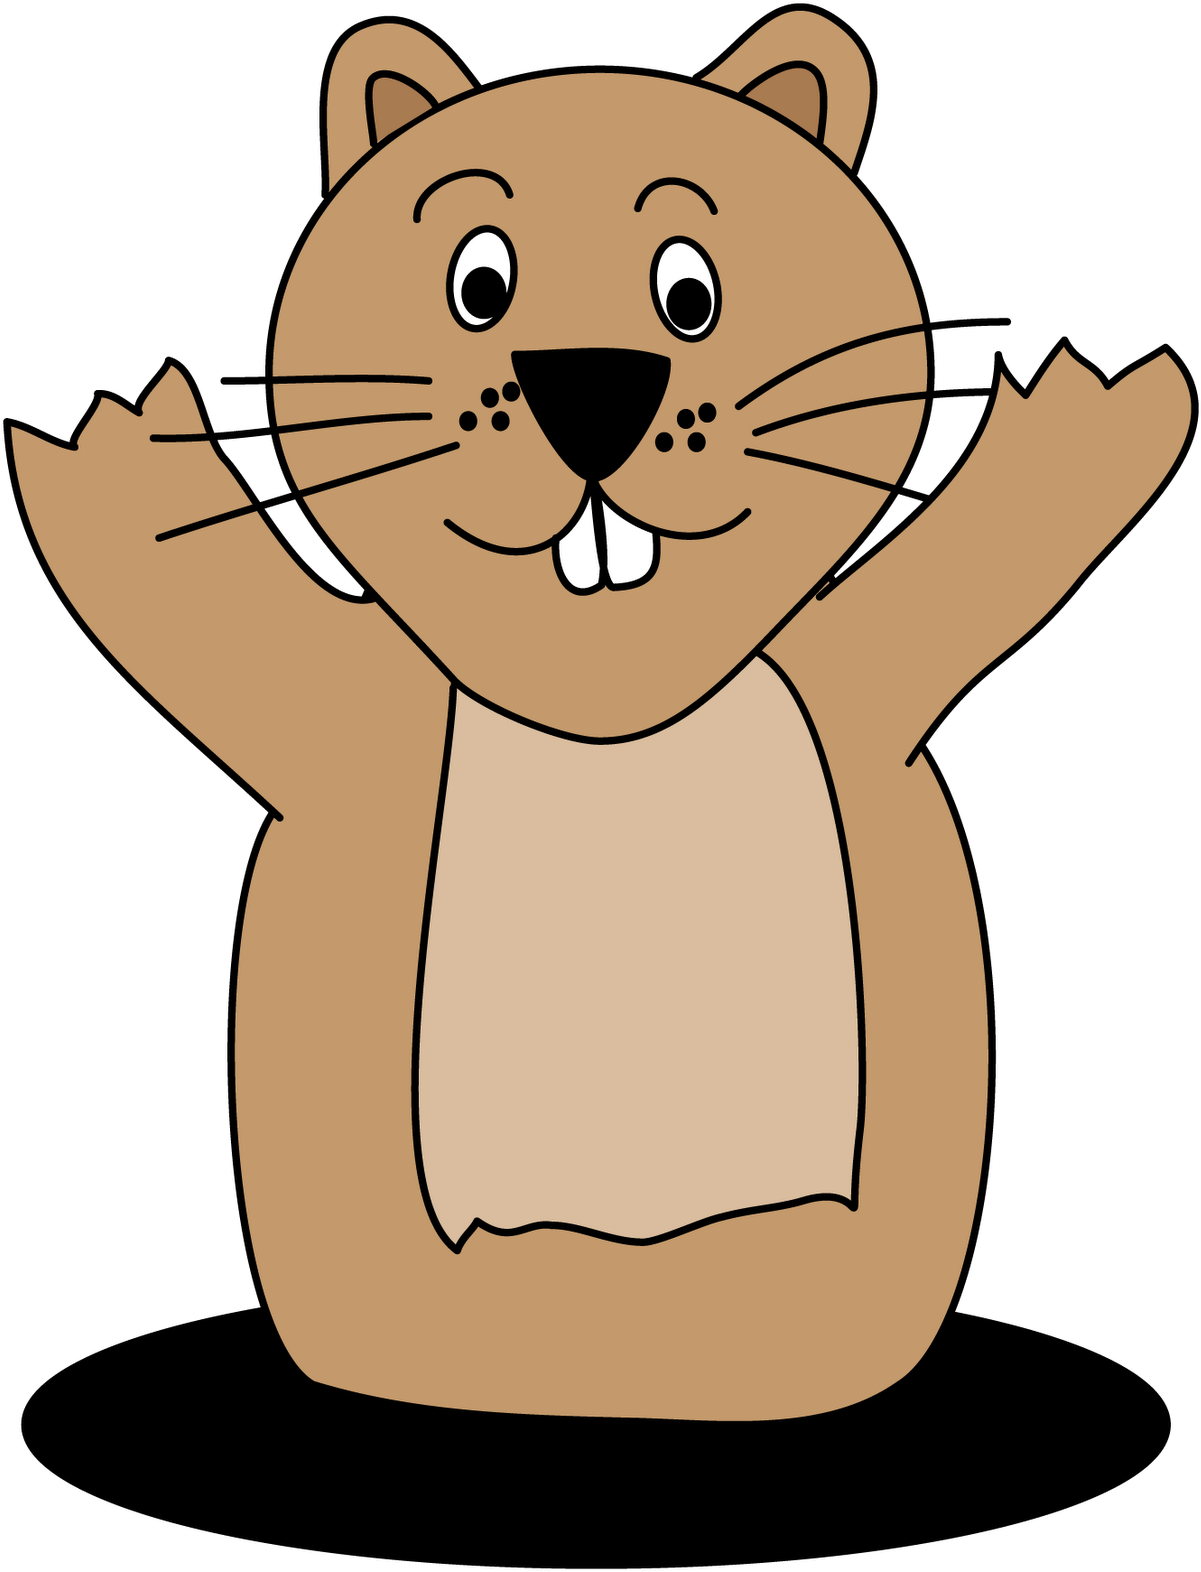 Groundhog Day Clip Art - Groundhogs Day Eve (1245x1600)